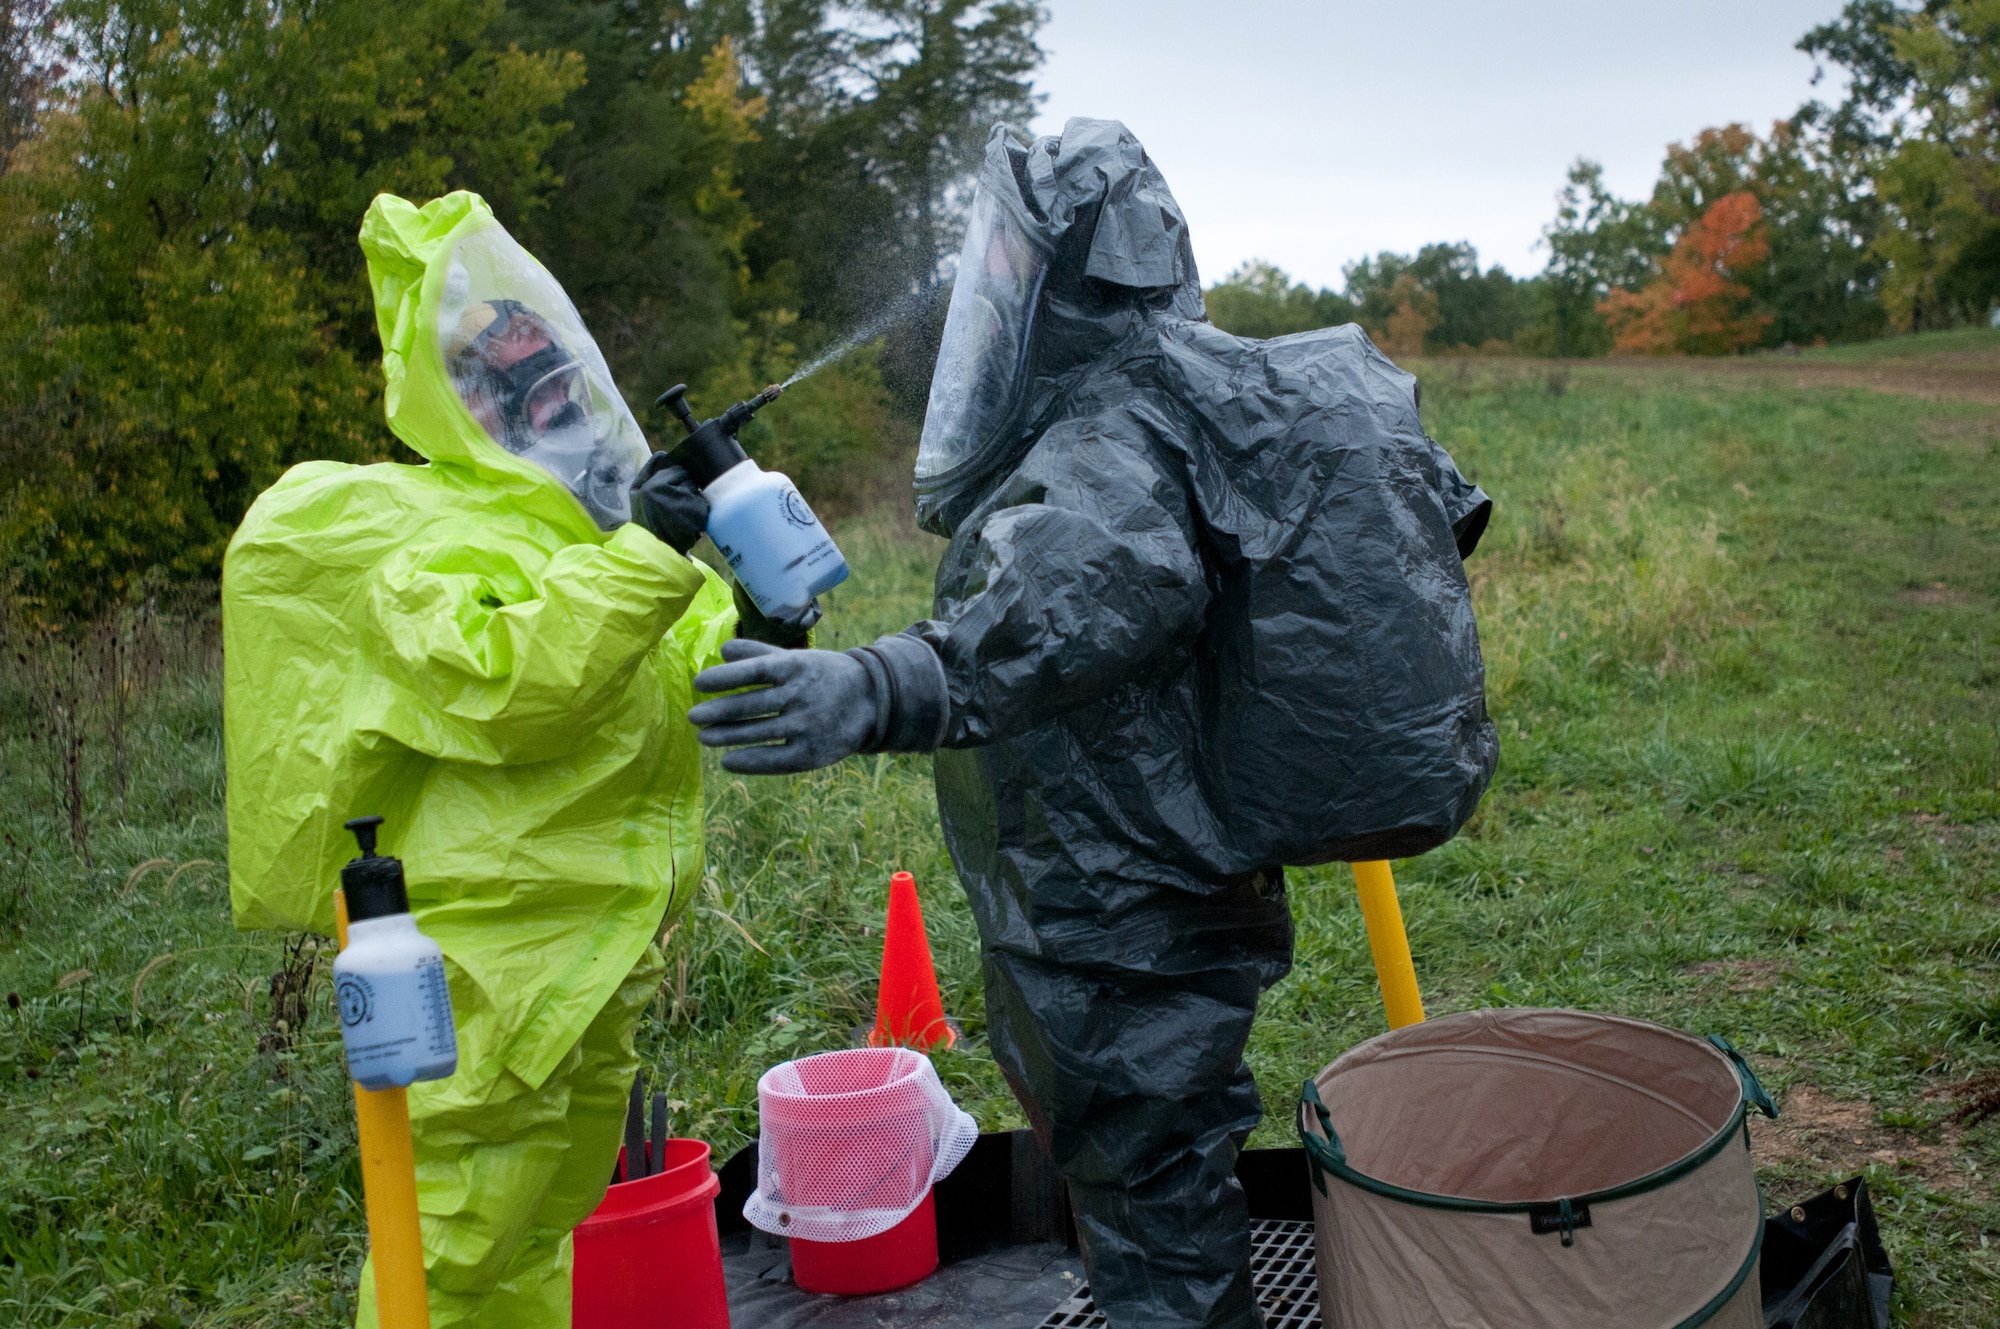 Kentucky Army National Guard Sgt. 1st Class Michael Davis, decontamination NCOIC for the 41st Civil Support Team, conducts decontamination procedures for Kentucky Air National Guard Staff Sgt. Joe Cloutier, a survey team member, as Cloutier returns from operations in the "hot zone” at a U.S. Army North exercise on Oct. 2, 2012, in Frankfort, Ky. (Kentucky Air National Guard photo by Master Sgt. Phil Speck)